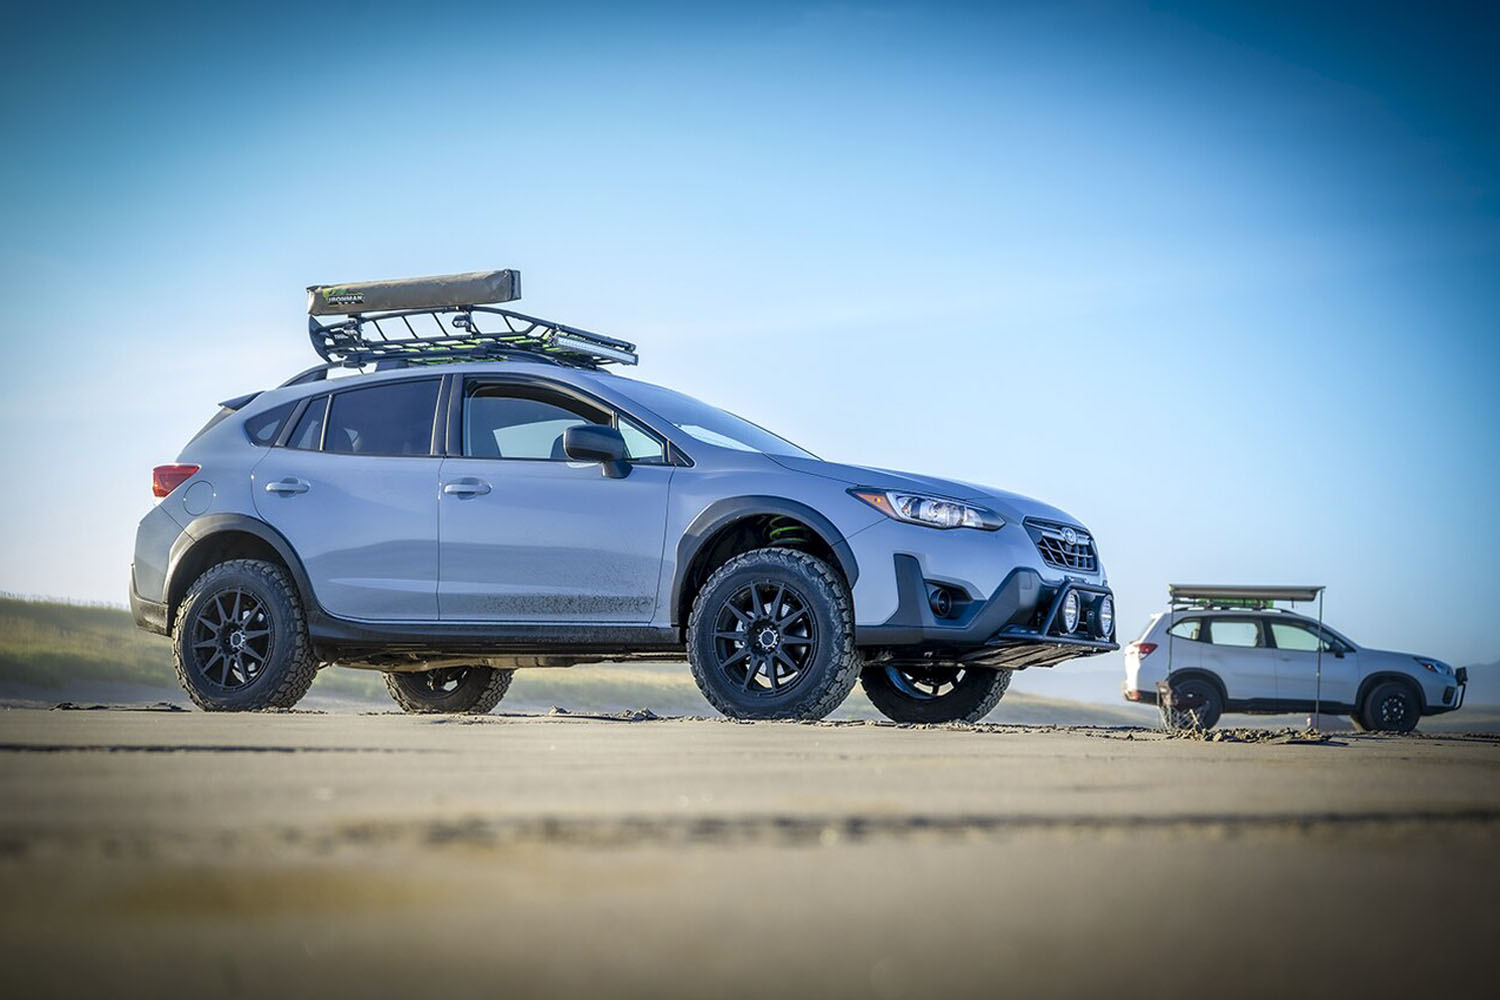 What is the wheel and tire setup on the lifted Subaru Crosstrek in all the photos?